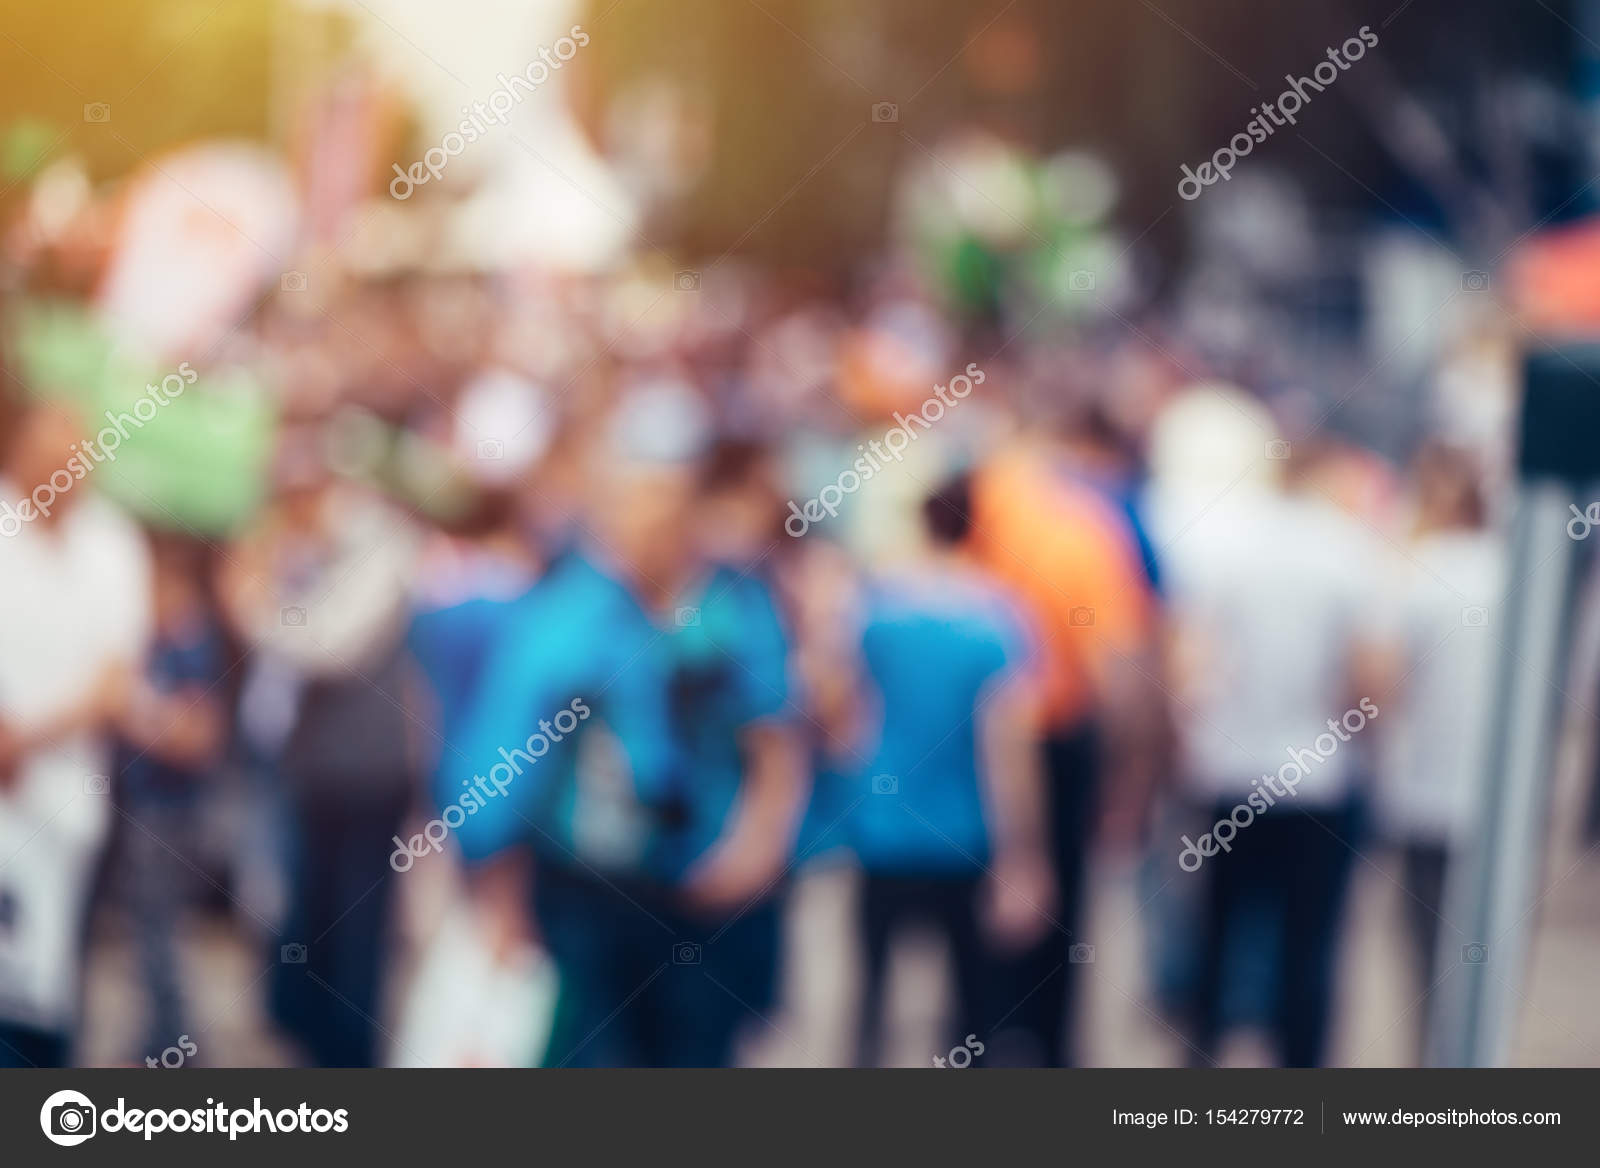 Blur defocussed crowd of people at public place Stock Photo by  ©stevanovicigor 154279772